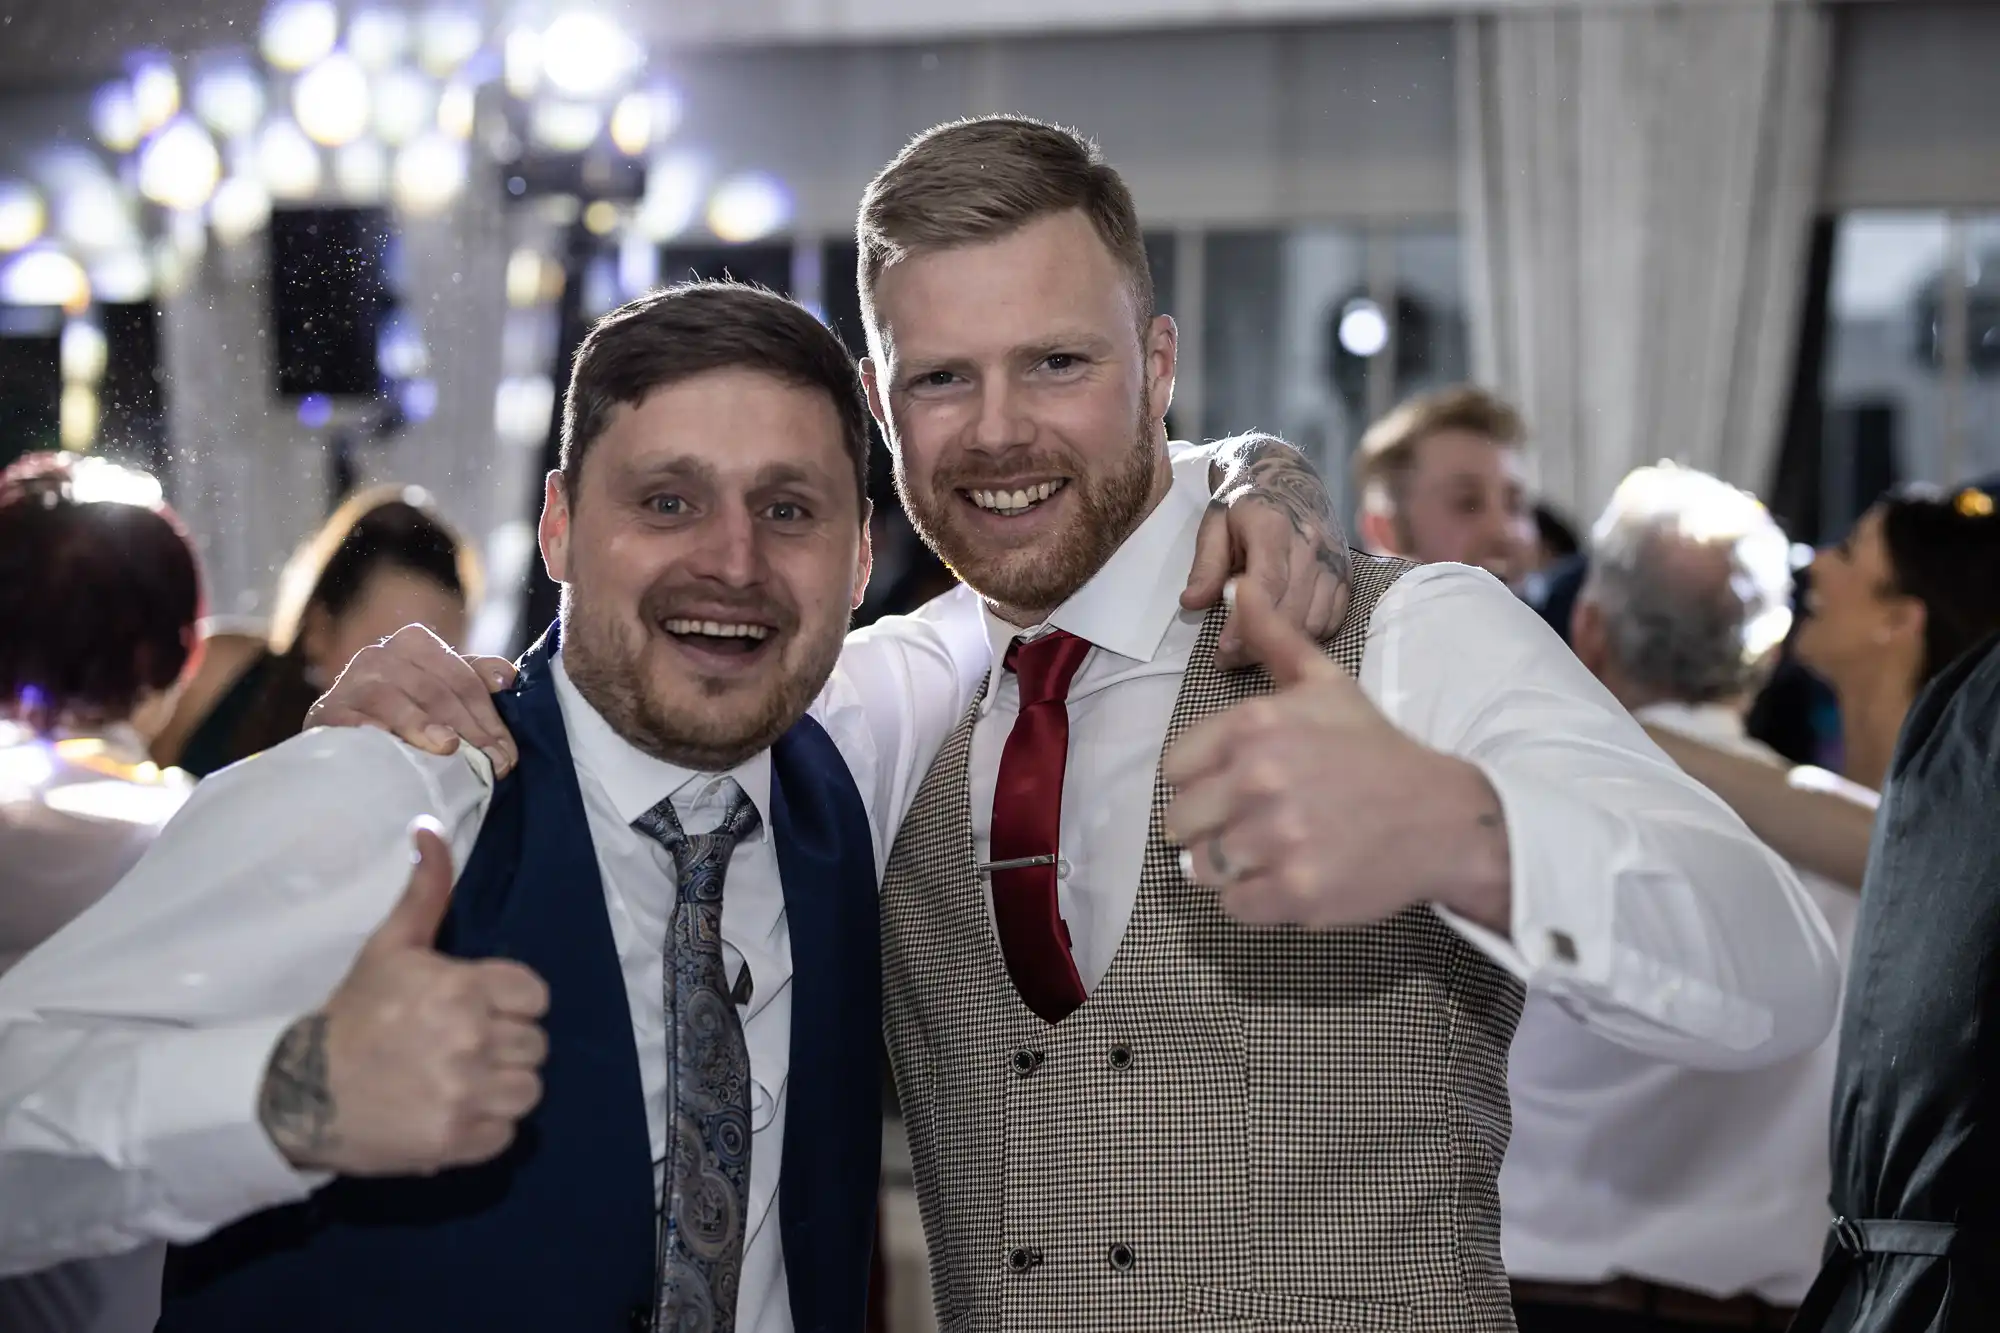 Two men in formal attire smile and give thumbs up at an indoor event with other people in the background.